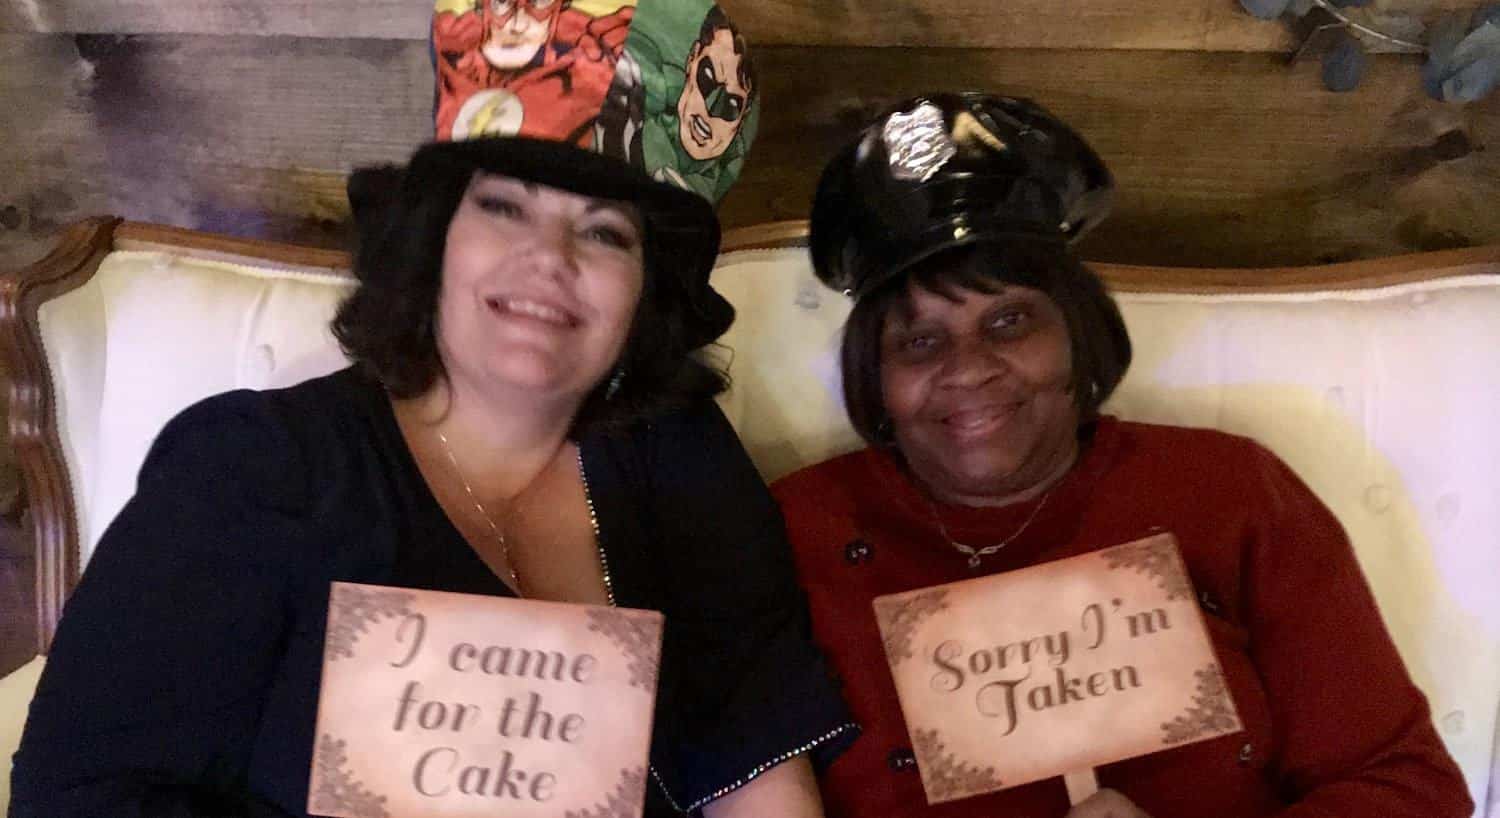 Two women smiling and wearing props for wedding reception photos